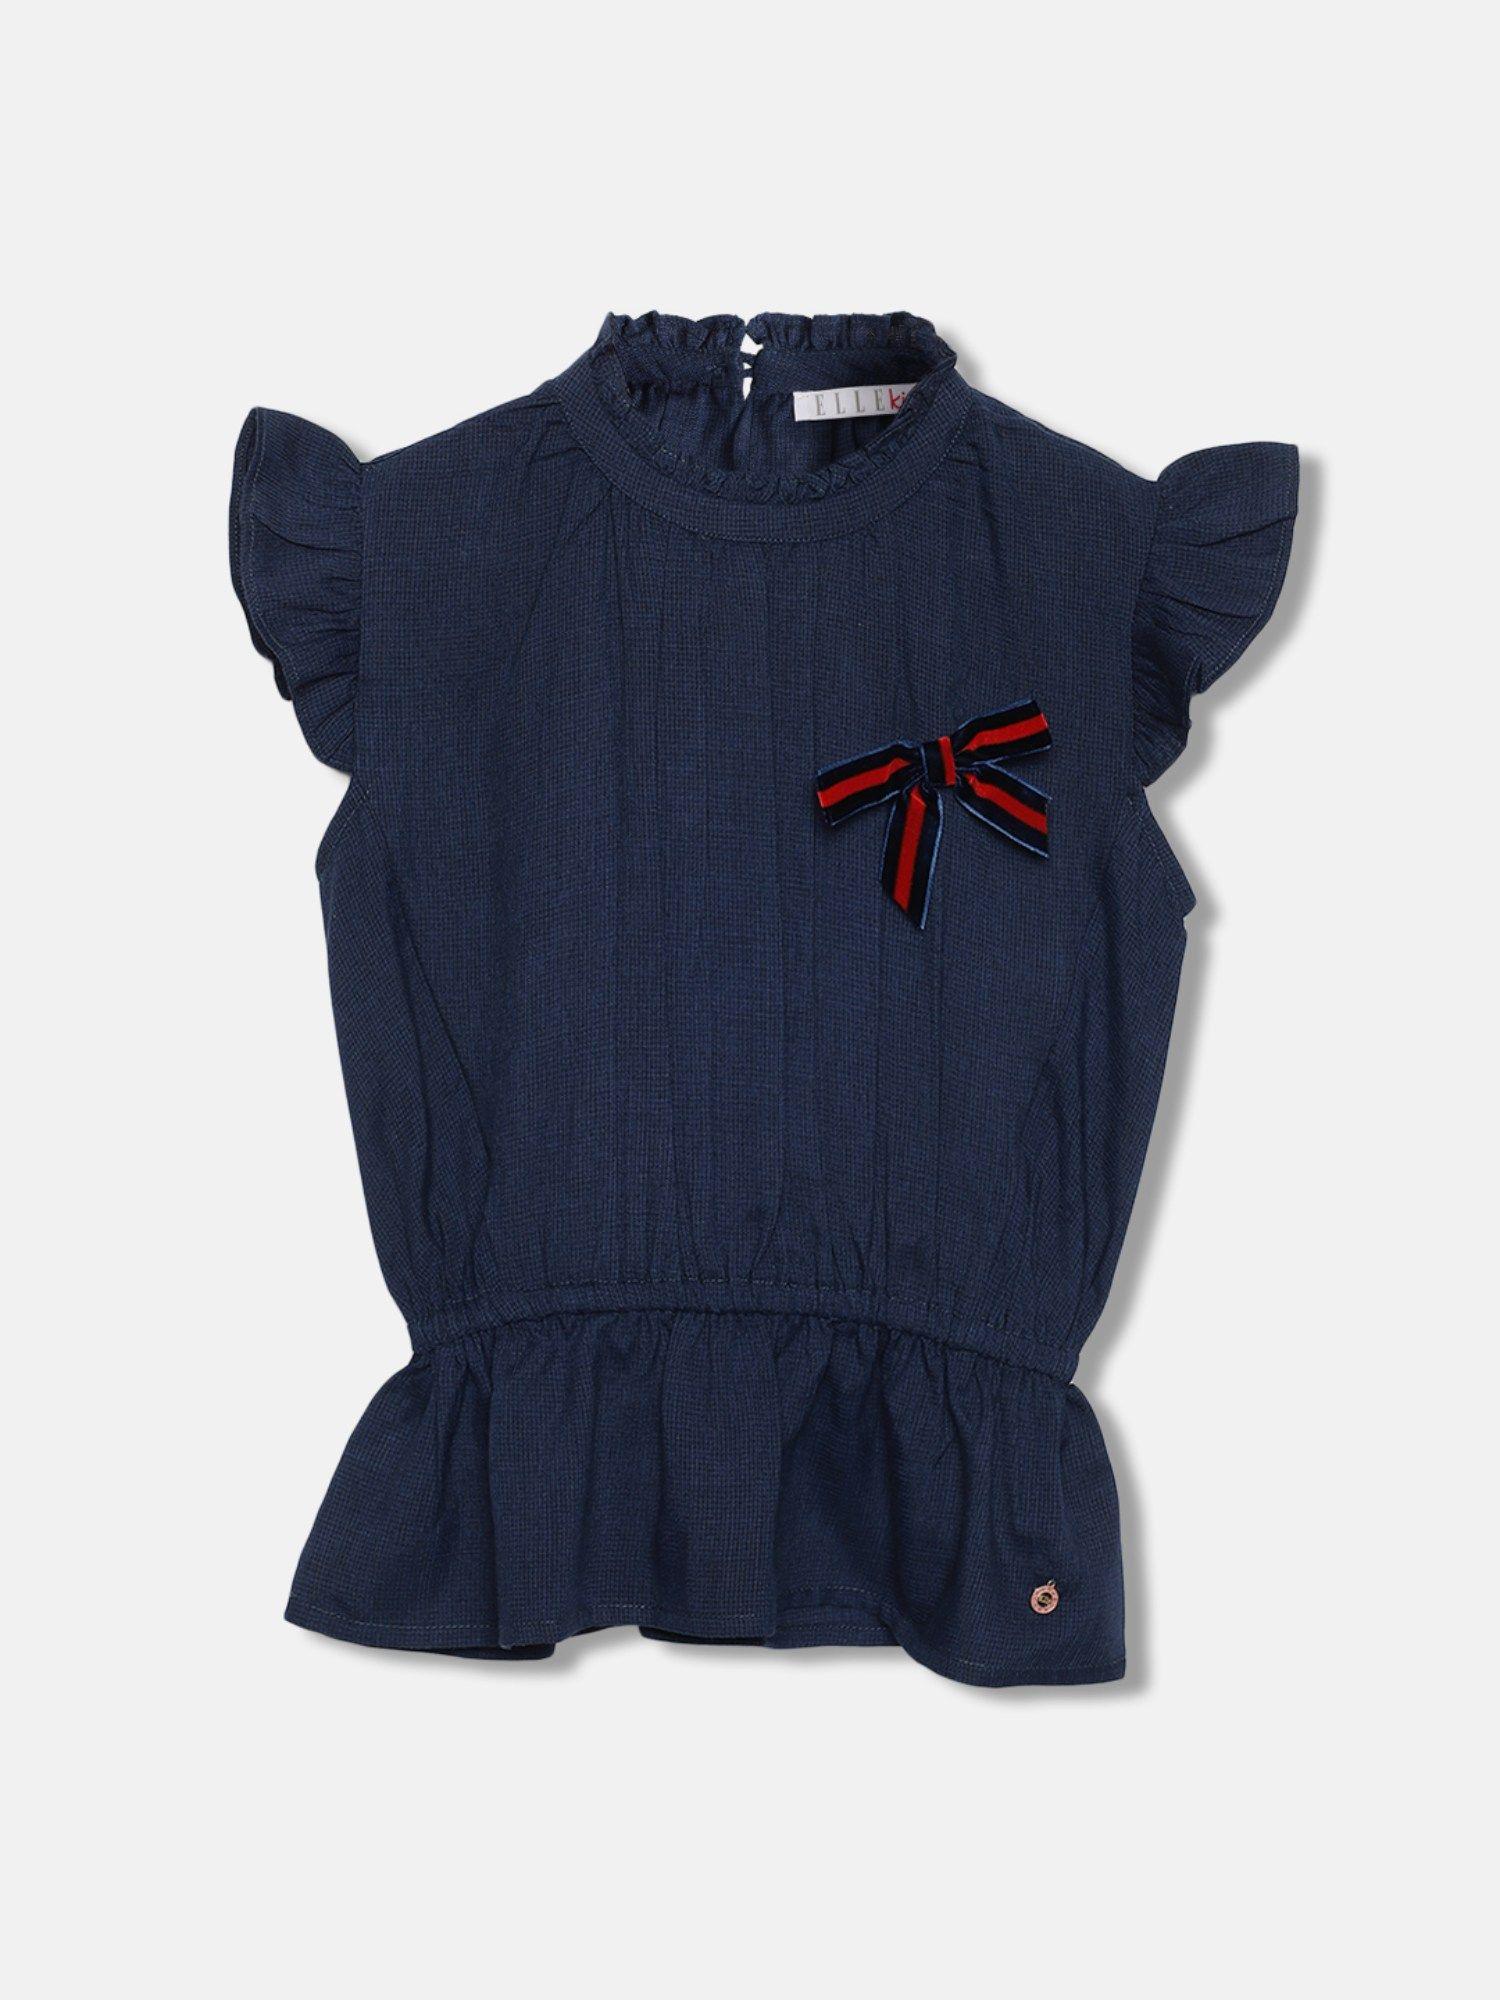 girls navy blue solid round neck short sleeves top